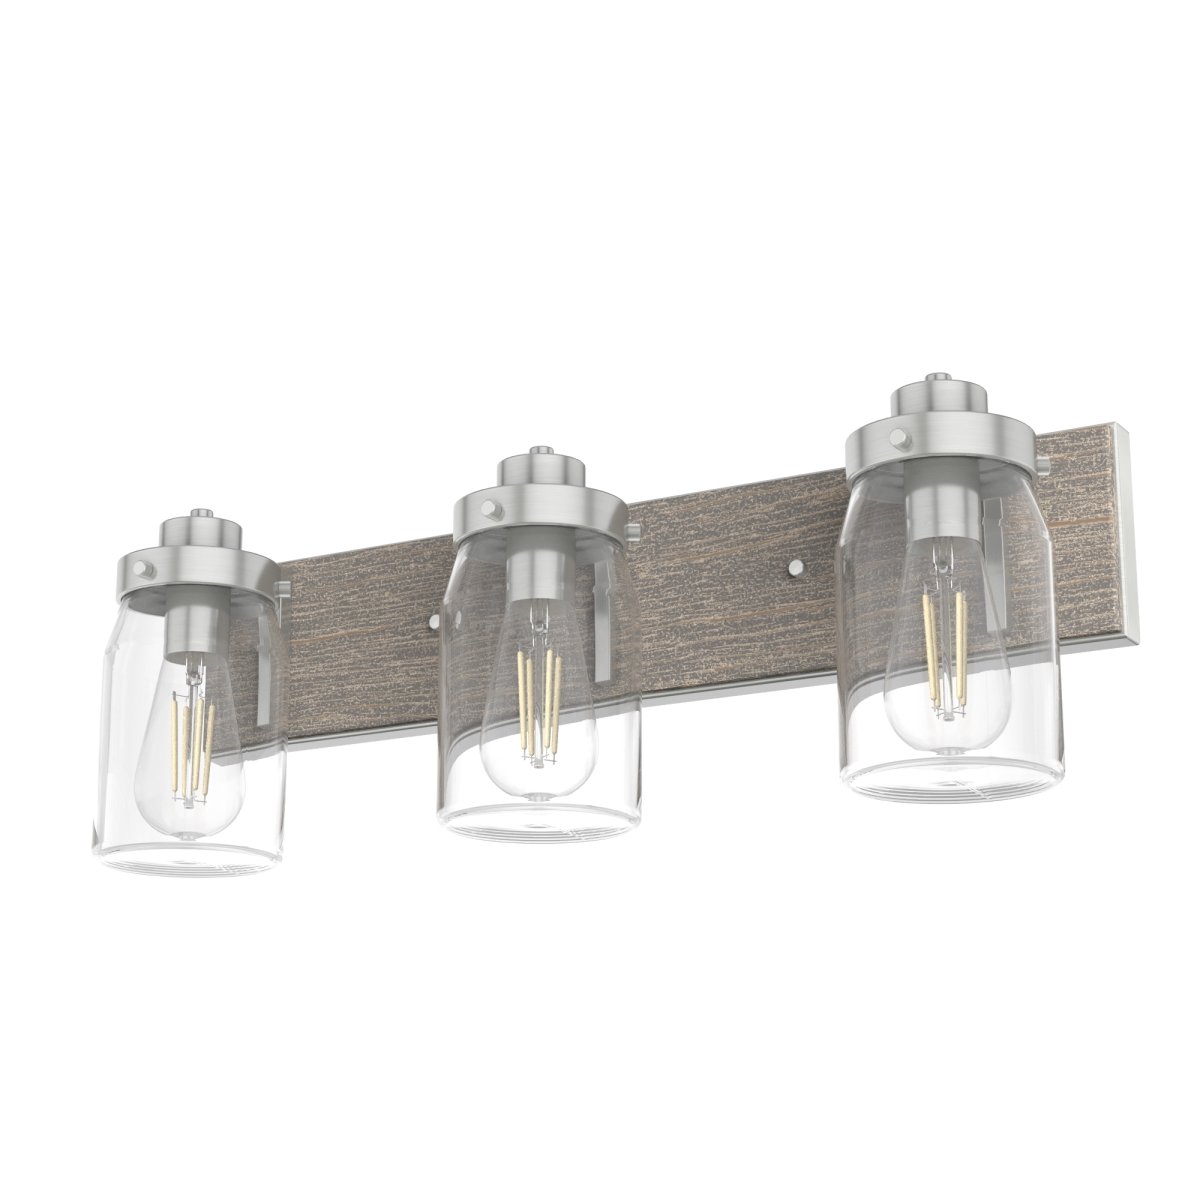 Picture of Hunter 48020 8.5 in. Devon Park Brushed Nickel & Gray Wood with Clear Glass 3 Light Bathroom Vanity Wall Light Fixture